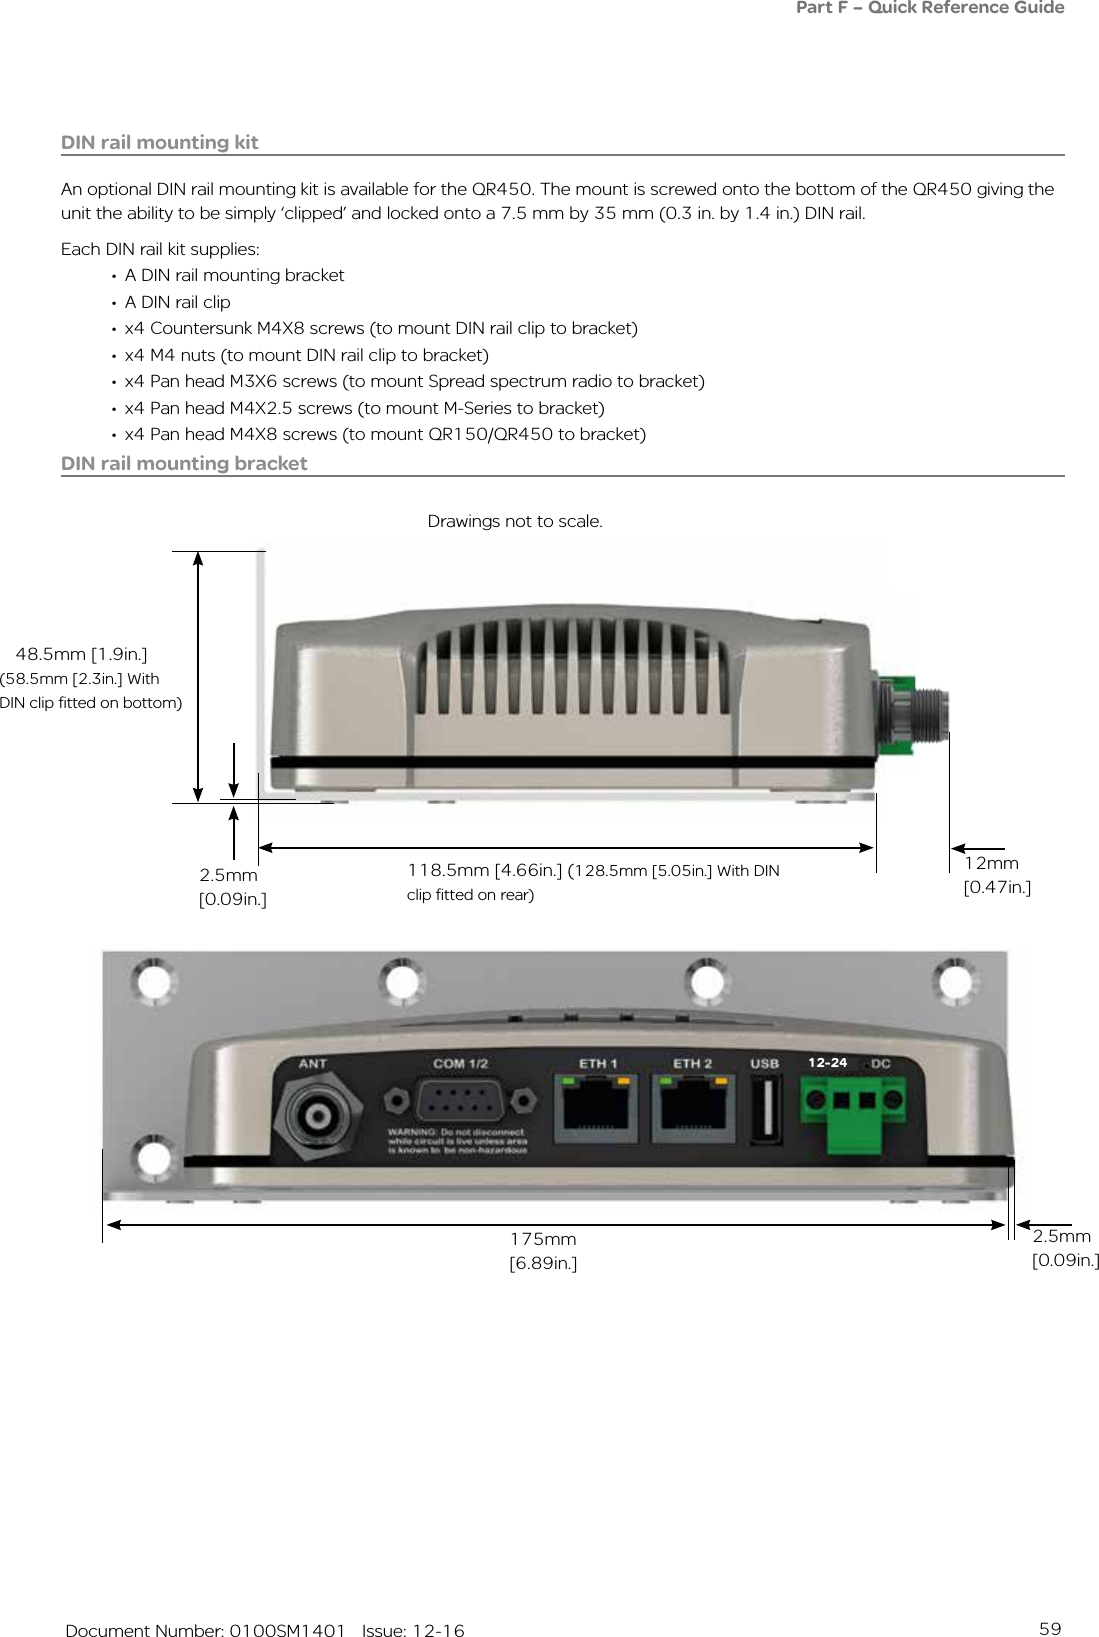 59   Document Number: 0100SM1401   Issue: 12-16DIN rail mounting kitAn optional DIN rail mounting kit is available for the QR450. The mount is screwed onto the bottom of the QR450 giving the unit the ability to be simply ‘clipped’ and locked onto a 7.5 mm by 35 mm (0.3 in. by 1.4 in.) DIN rail.Each DIN rail kit supplies:•  A DIN rail mounting bracket•  A DIN rail clip•  x4 Countersunk M4X8 screws (to mount DIN rail clip to bracket)•  x4 M4 nuts (to mount DIN rail clip to bracket)•  x4 Pan head M3X6 screws (to mount Spread spectrum radio to bracket)•  x4 Pan head M4X2.5 screws (to mount M-Series to bracket)•  x4 Pan head M4X8 screws (to mount QR150/QR450 to bracket)Drawings not to scale.118.5mm [4.66in.] (128.5mm [5.05in.] With DIN clip fitted on rear)12mm [0.47in.]2.5mm [0.09in.]48.5mm [1.9in.]175mm [6.89in.]DIN rail mounting bracket(58.5mm [2.3in.] With DIN clip fitted on bottom)Part F – Quick Reference Guide 2.5mm [0.09in.]12-24